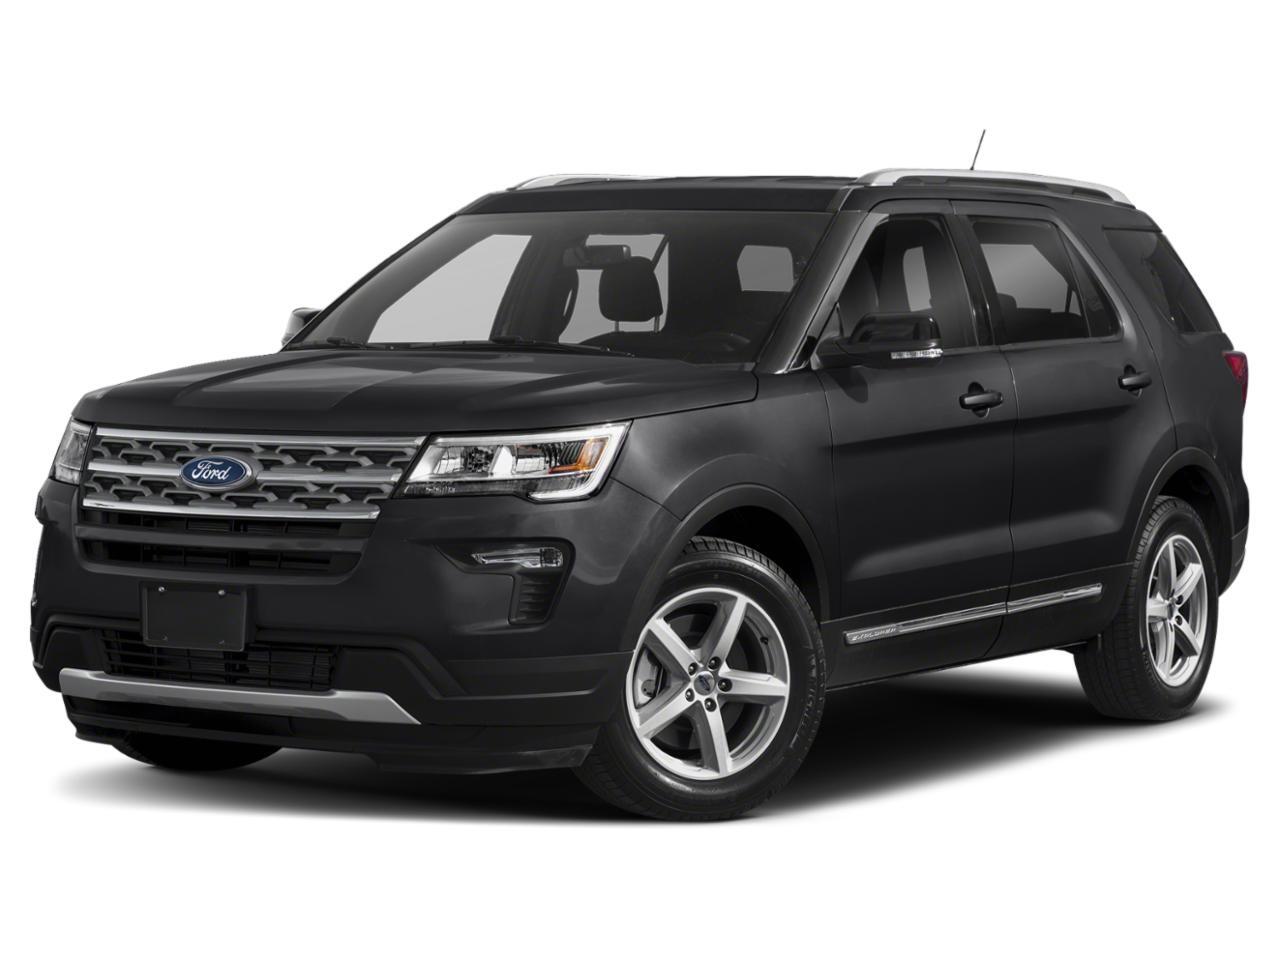 2019 Ford Explorer XLT - 4WD| 7 PASS | POWER SEATS | LEATHER INTERIOR